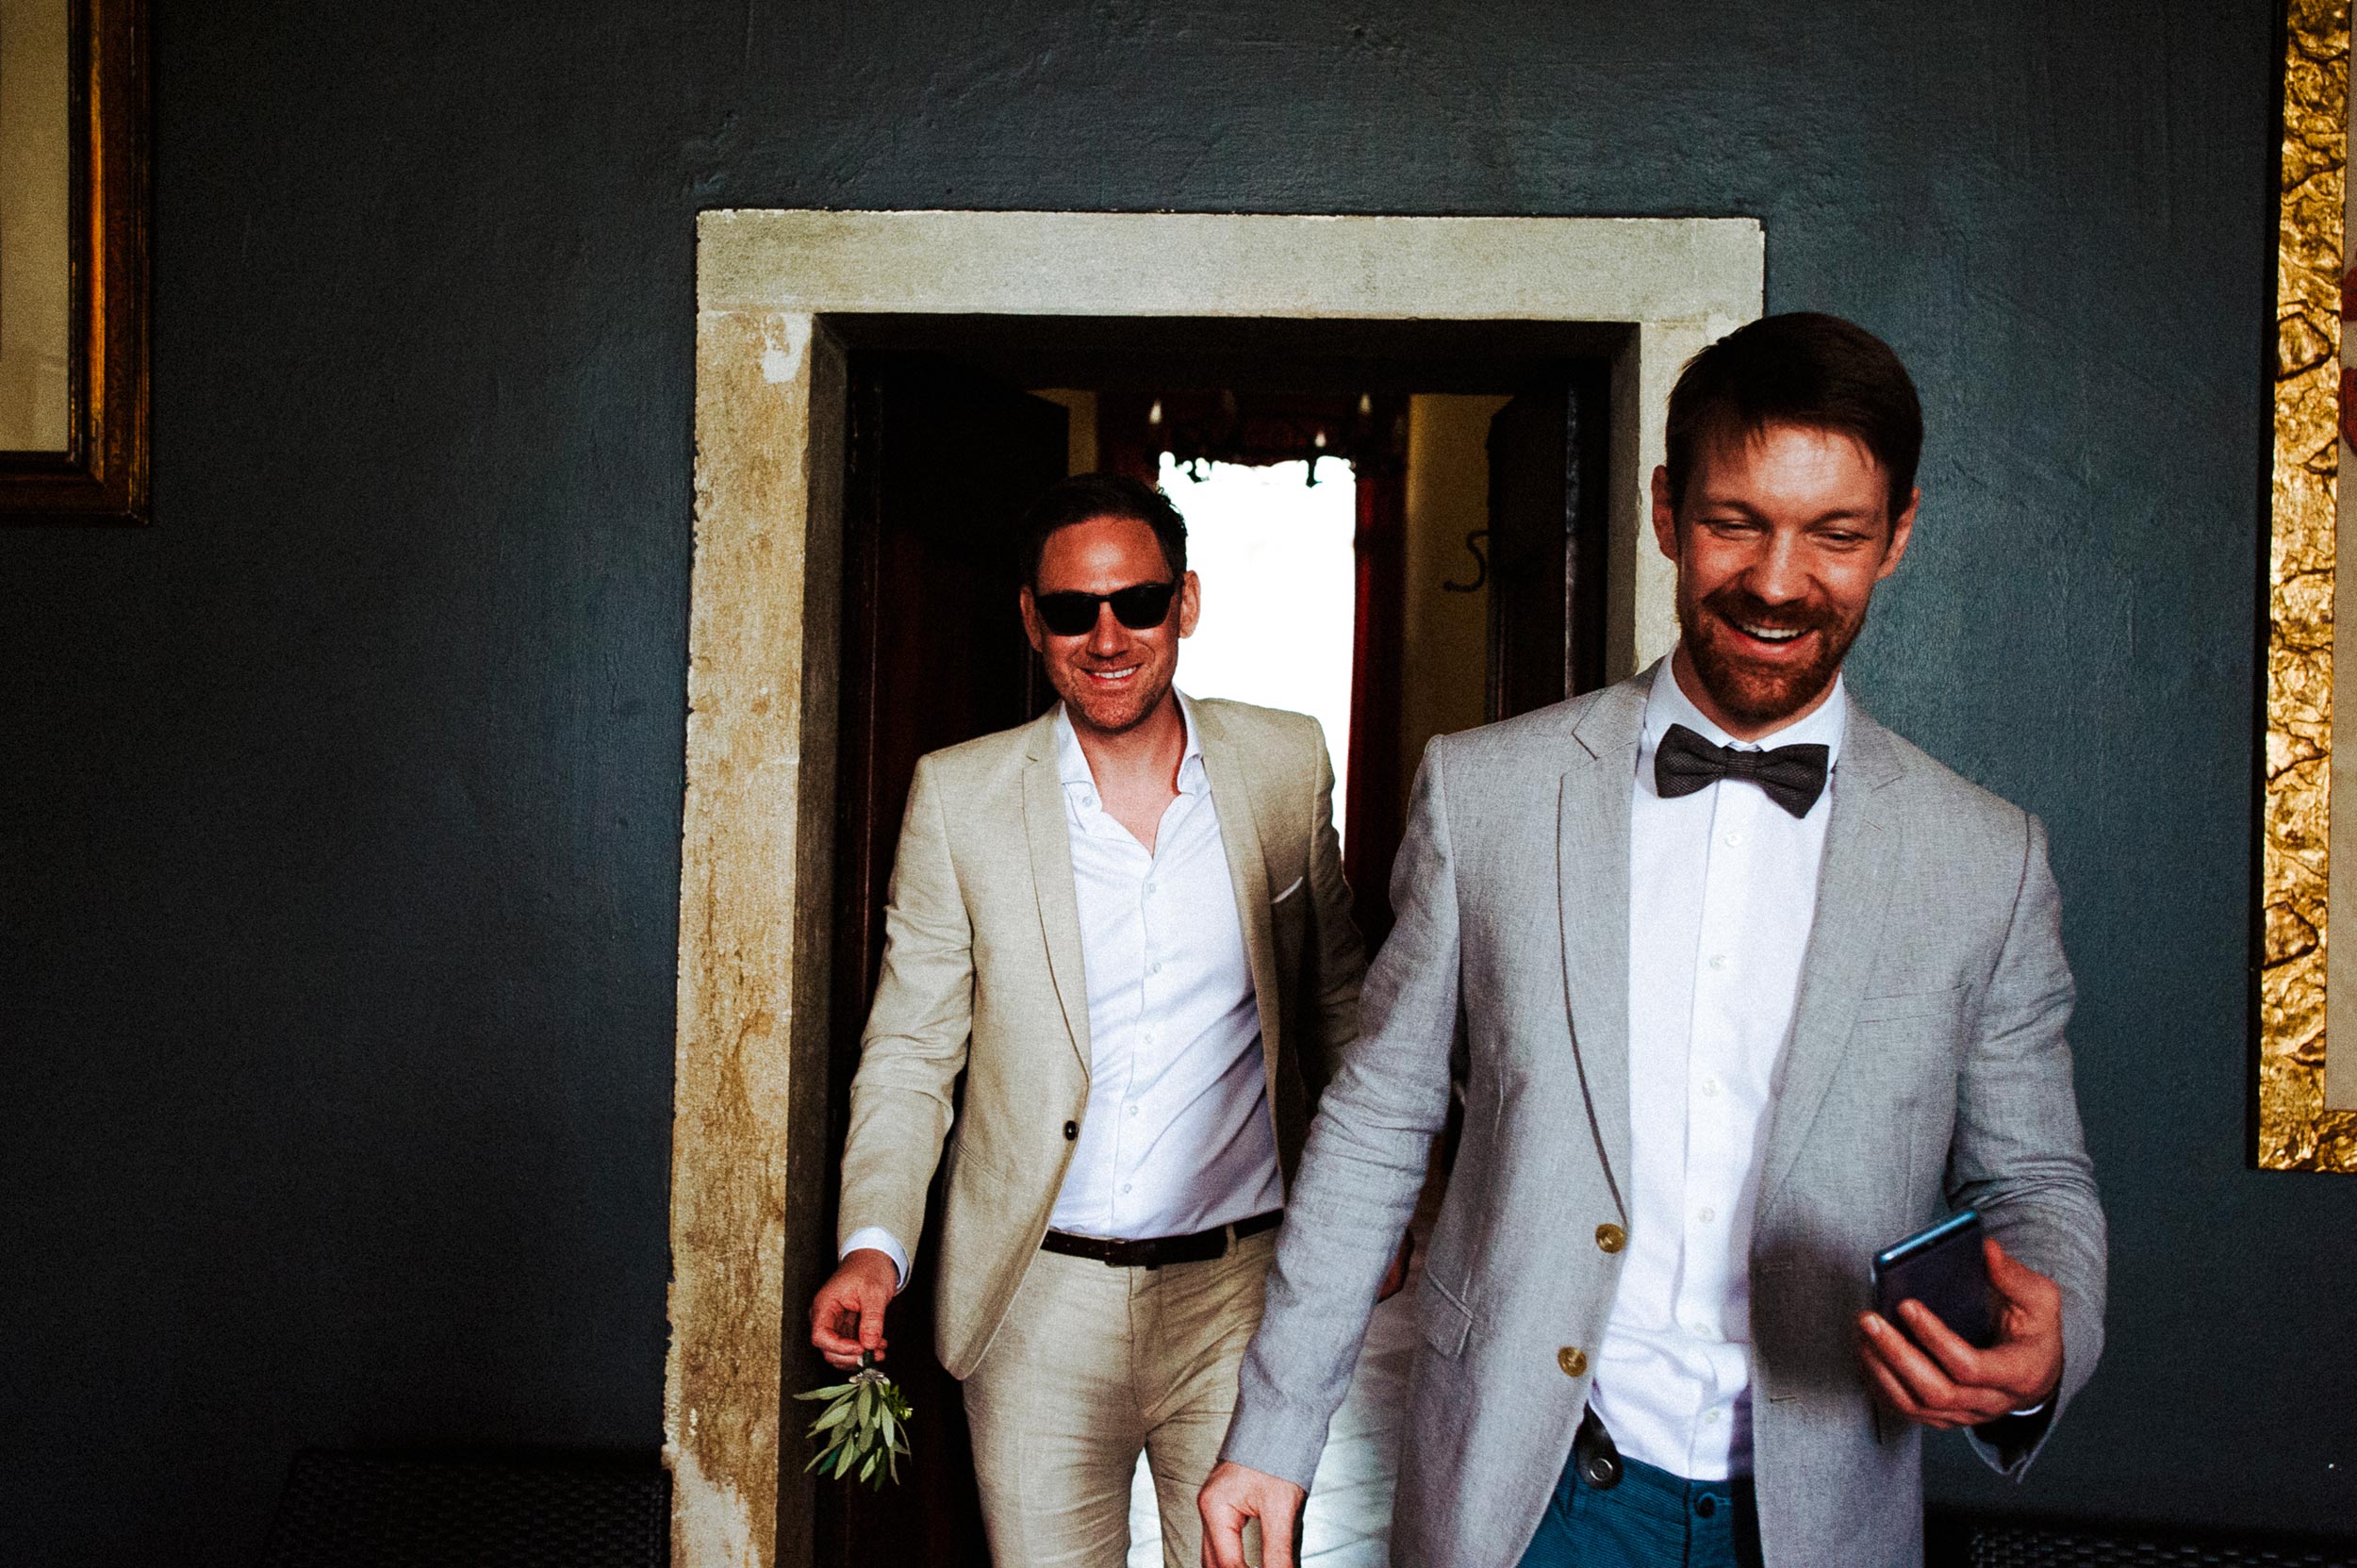 The Groom and his Best Man getting ready in Villa Godi Malinverni Wedding in Italy by Alessandro Avenali